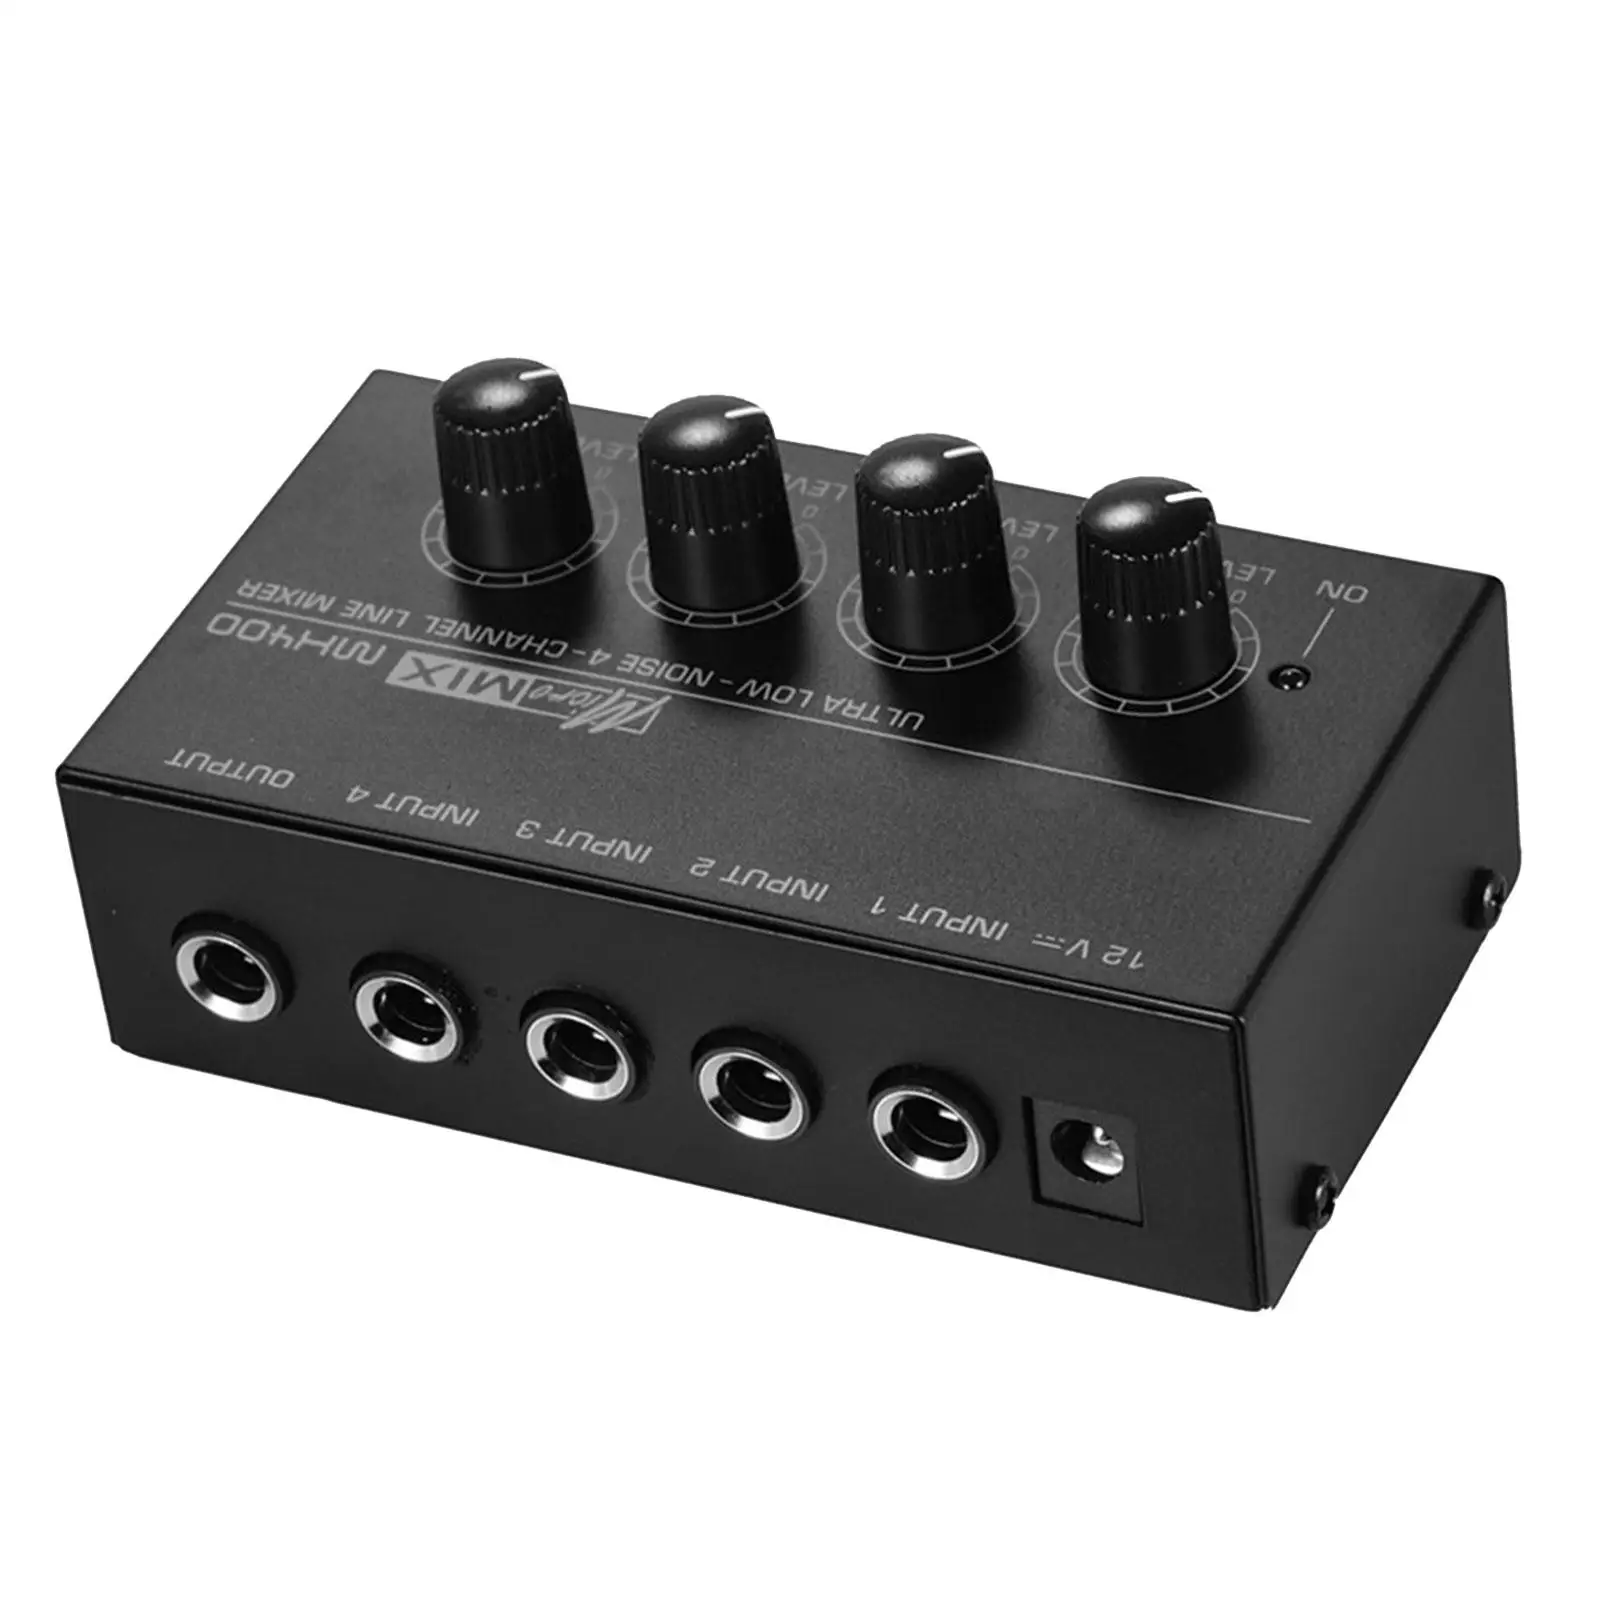 4 Channel Audio Mixer Ultra Low Noise Mini Sound System Echo Mixer Mixing Console for Outdoor Small Clubs Recording Studio Party